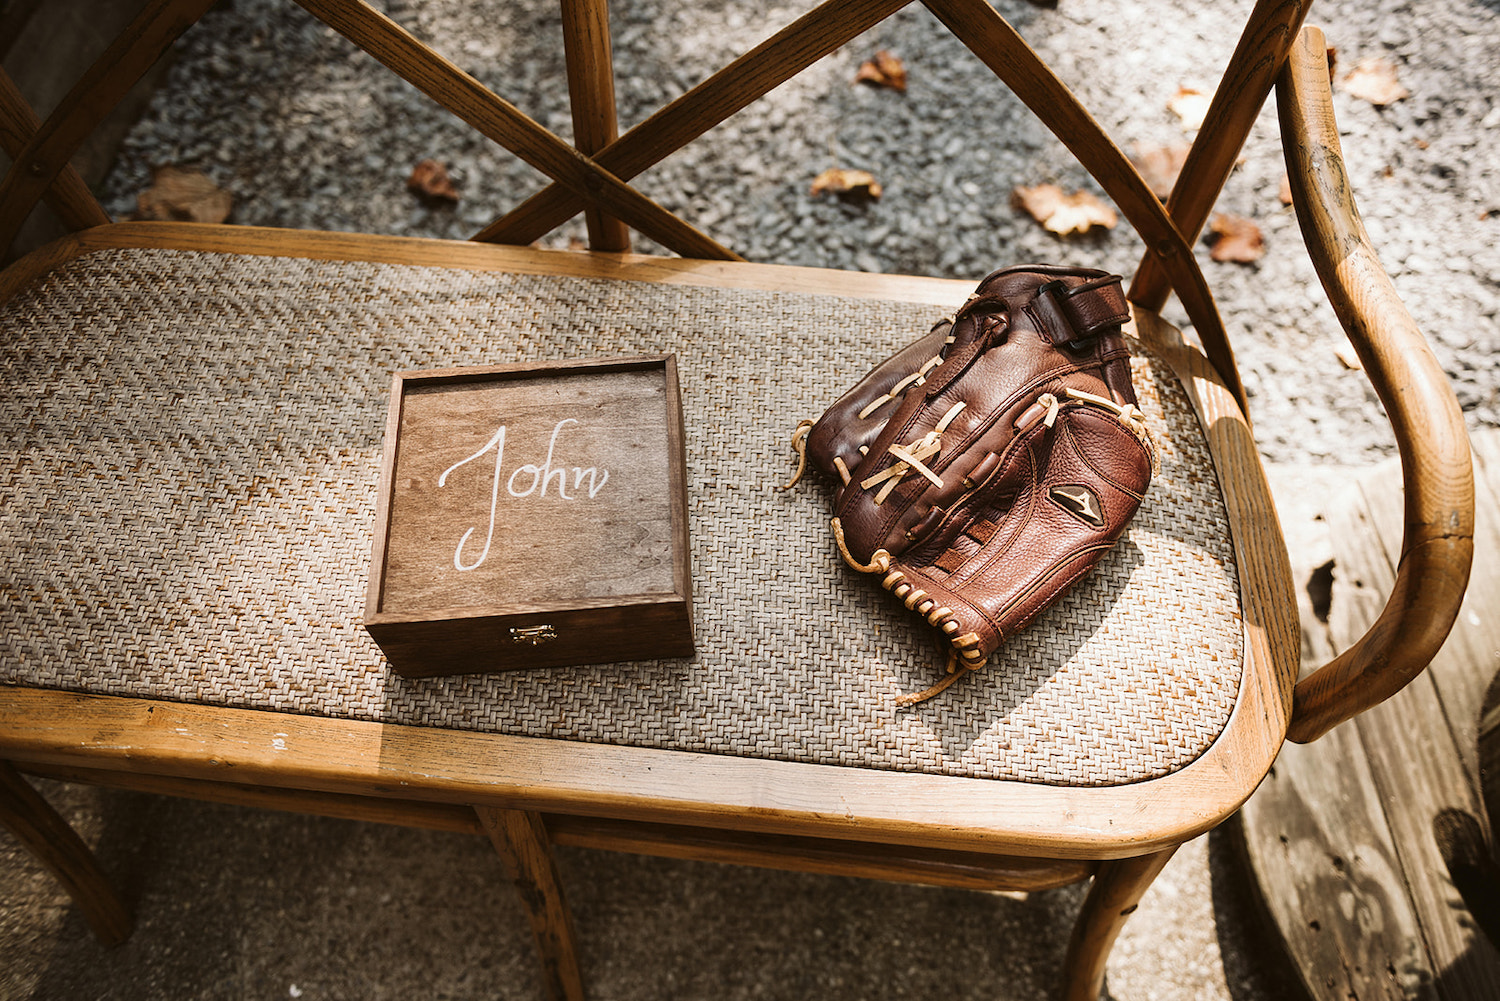 wooden box labeled John sits on a bench next to baseball glove